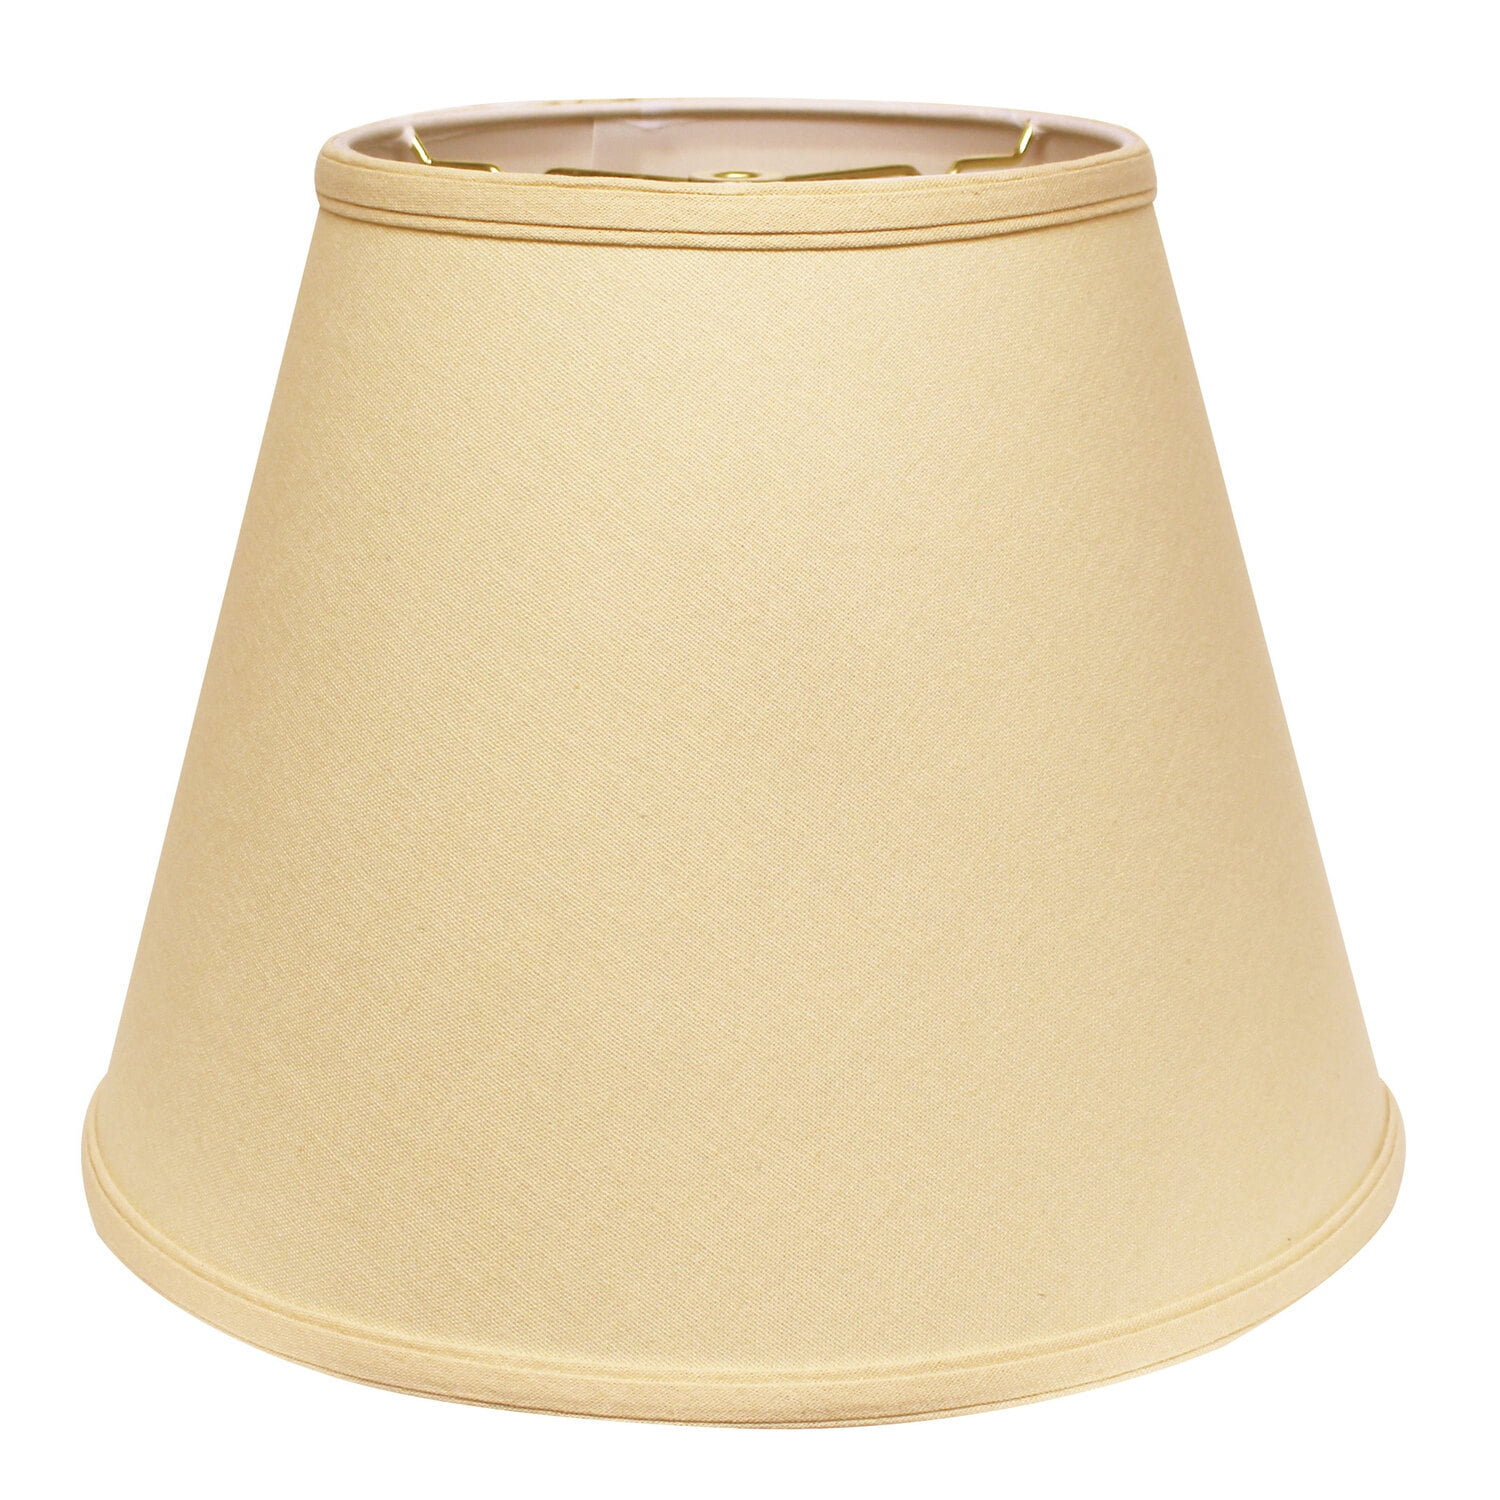 ID 3941671 Slant Empire Softback Lampshade with Washer Fitter in Brown 